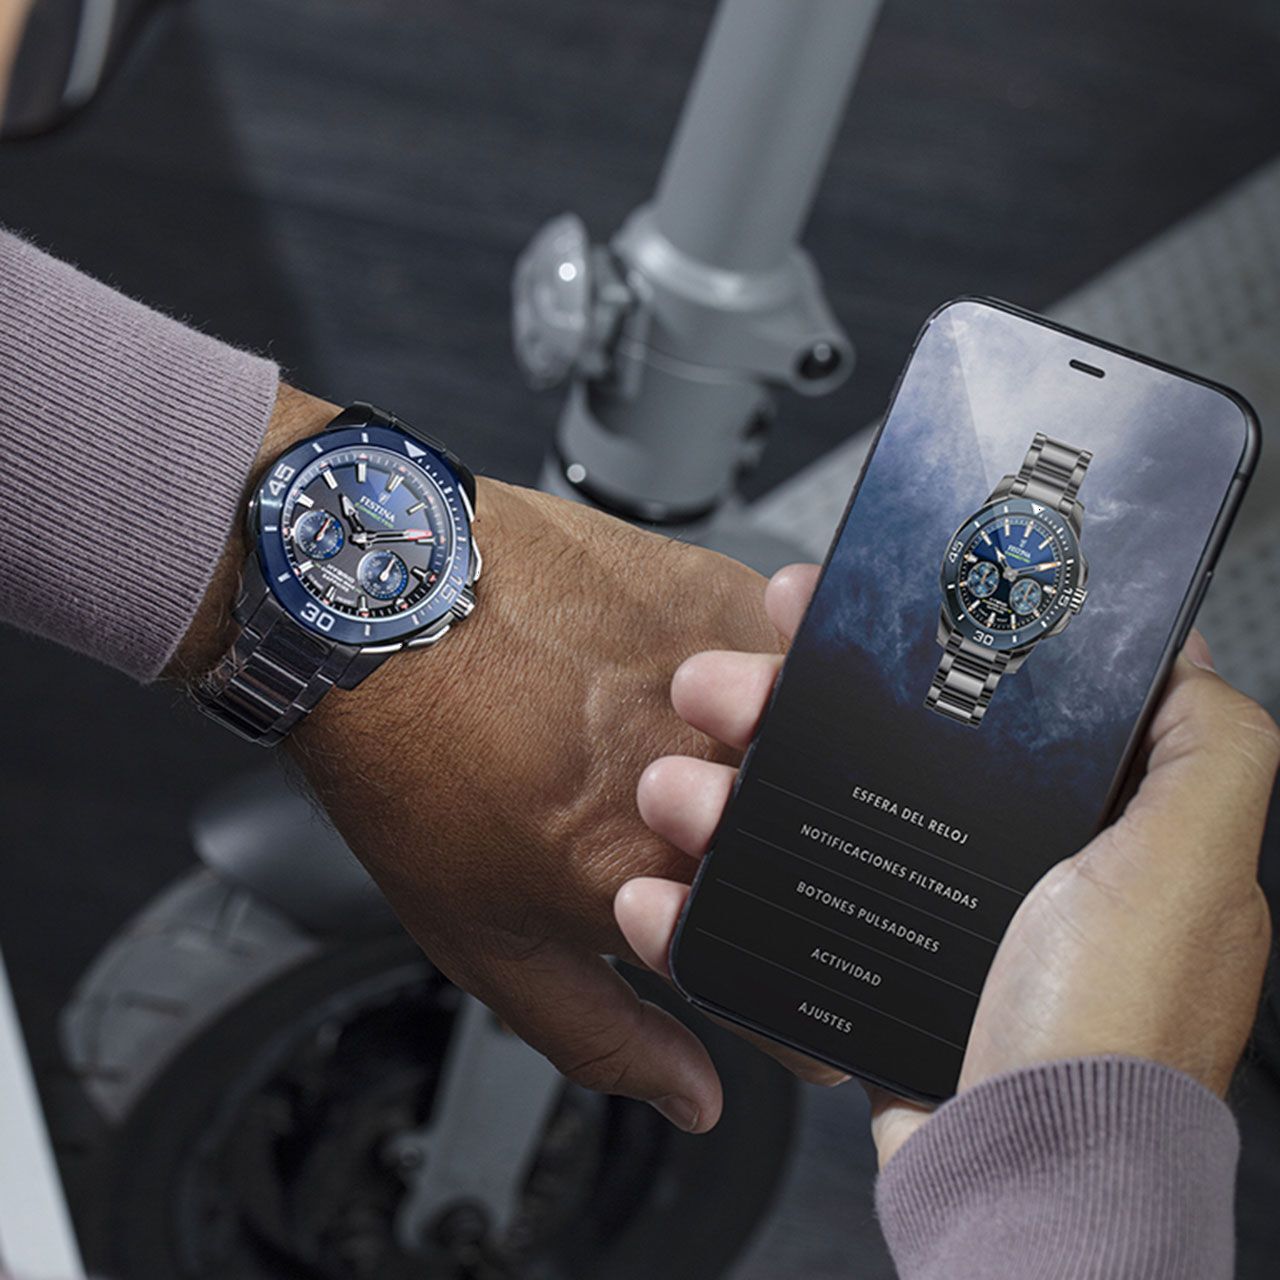 Festina connected watches